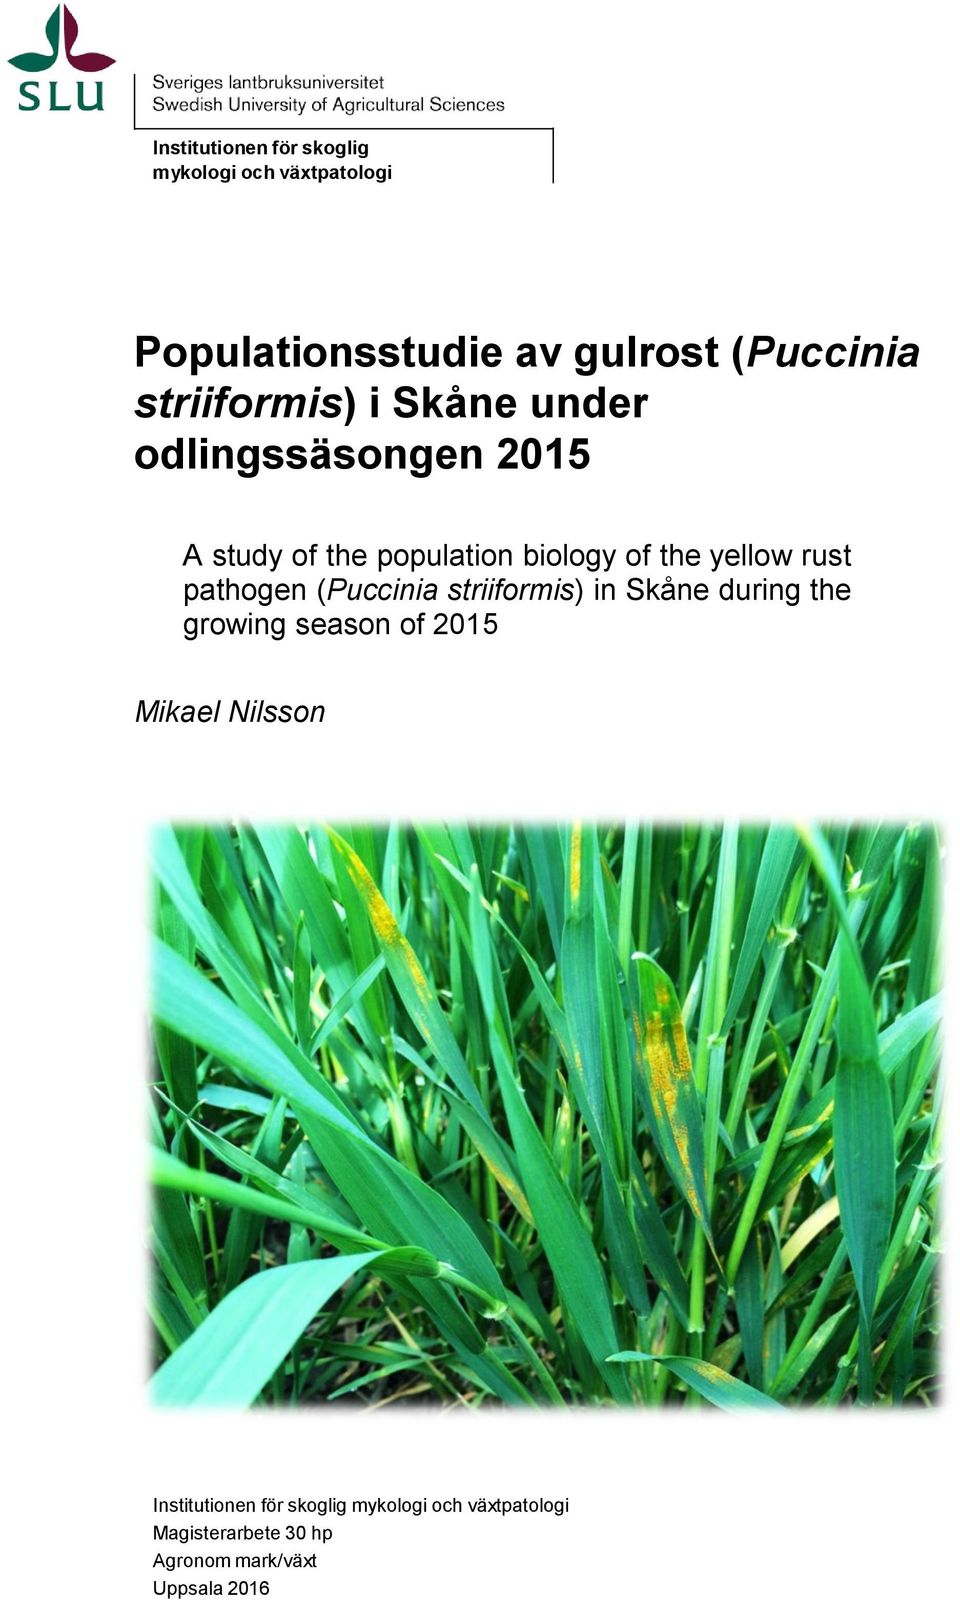 rust pathogen (Puccinia striiformis) in Skåne during the growing season of 2015 Mikael Nilsson